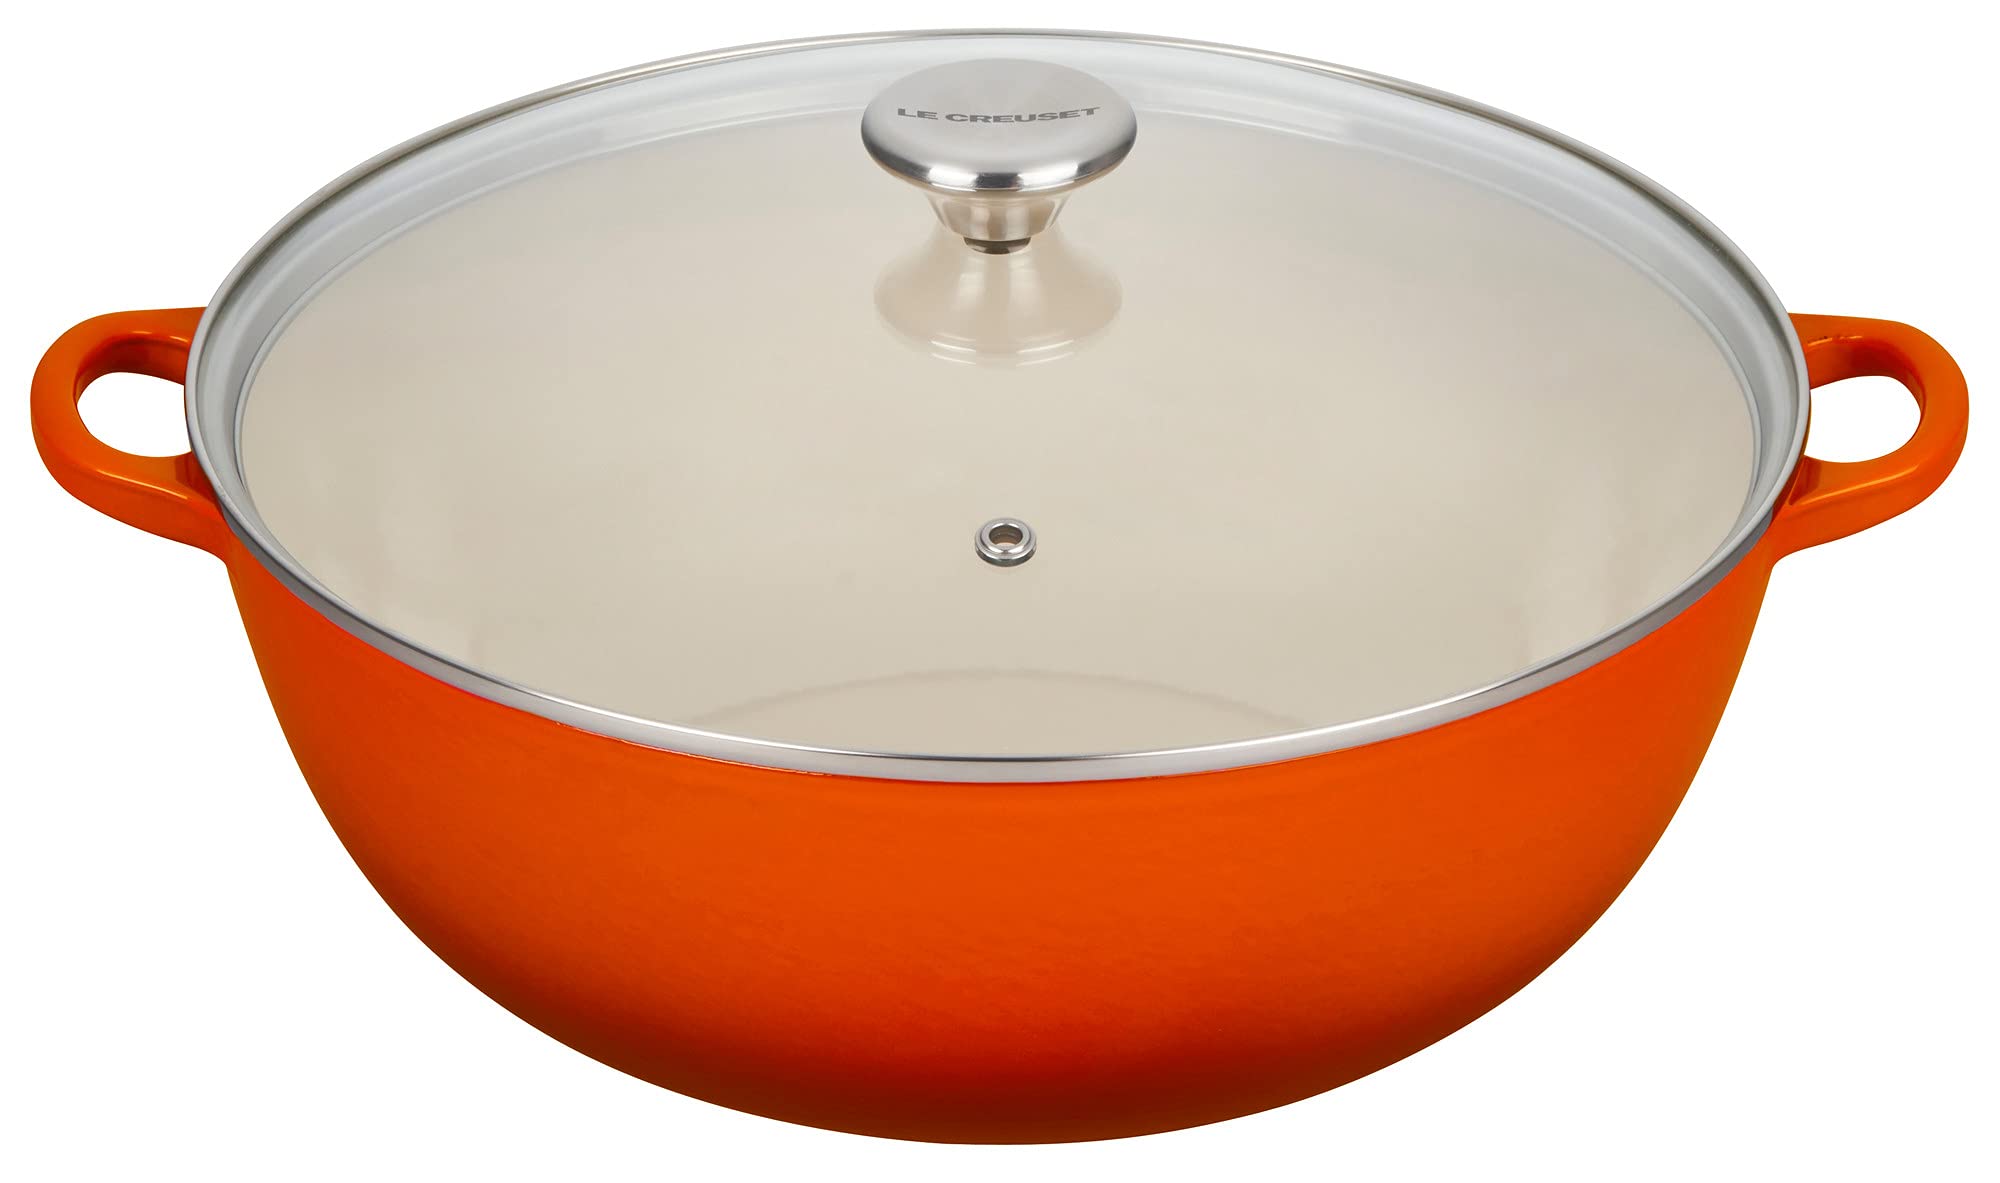 7.5-Quart Le Creuset Enameled Cast Iron Oven with Glass Lid (Flame) $237.16 + Free Shipping